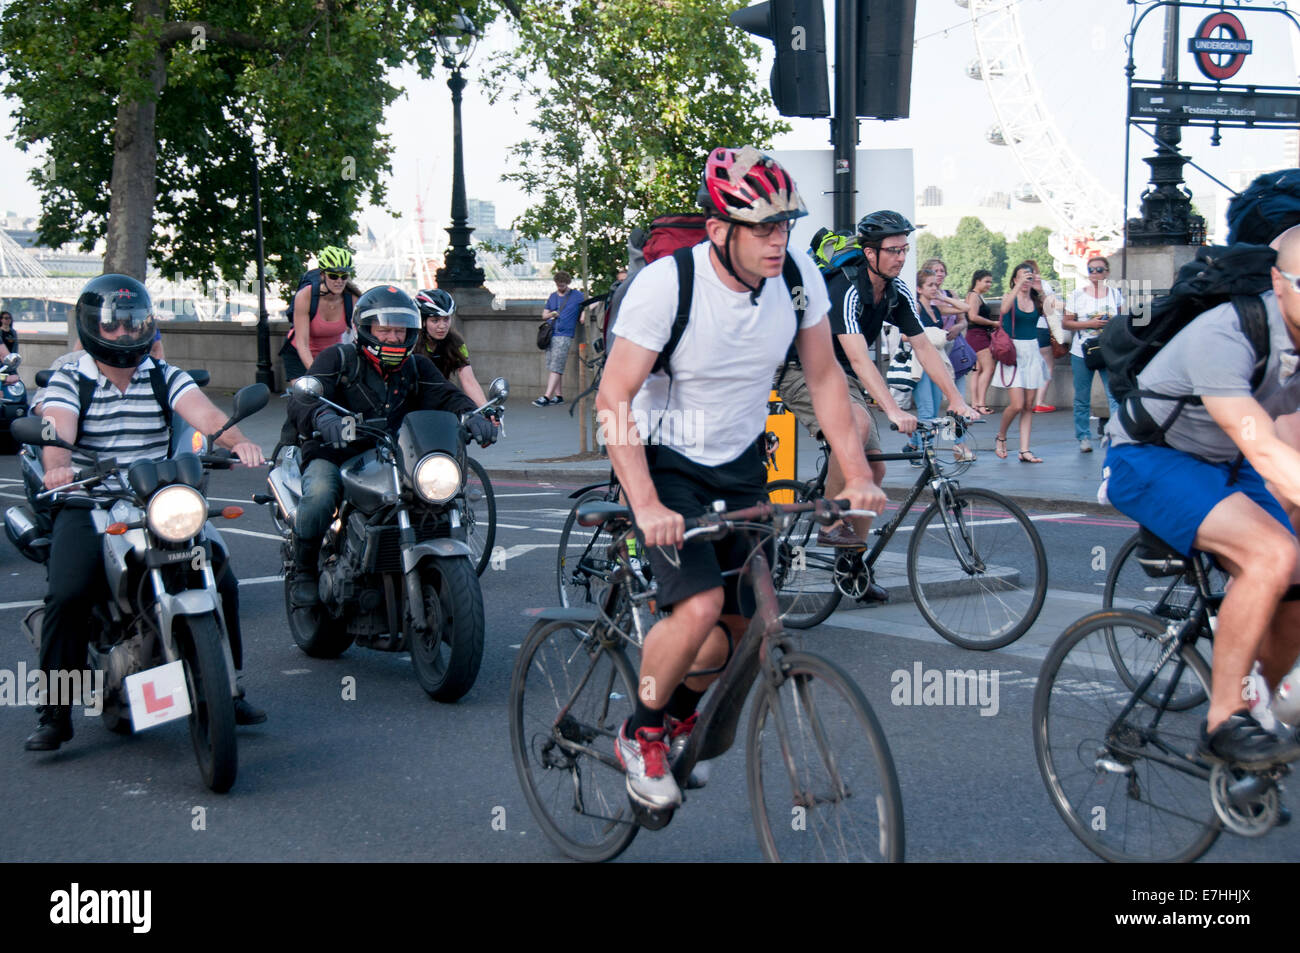 Motorbikes and bicycles taking off from traffic lights through traffic in London Stock Photo